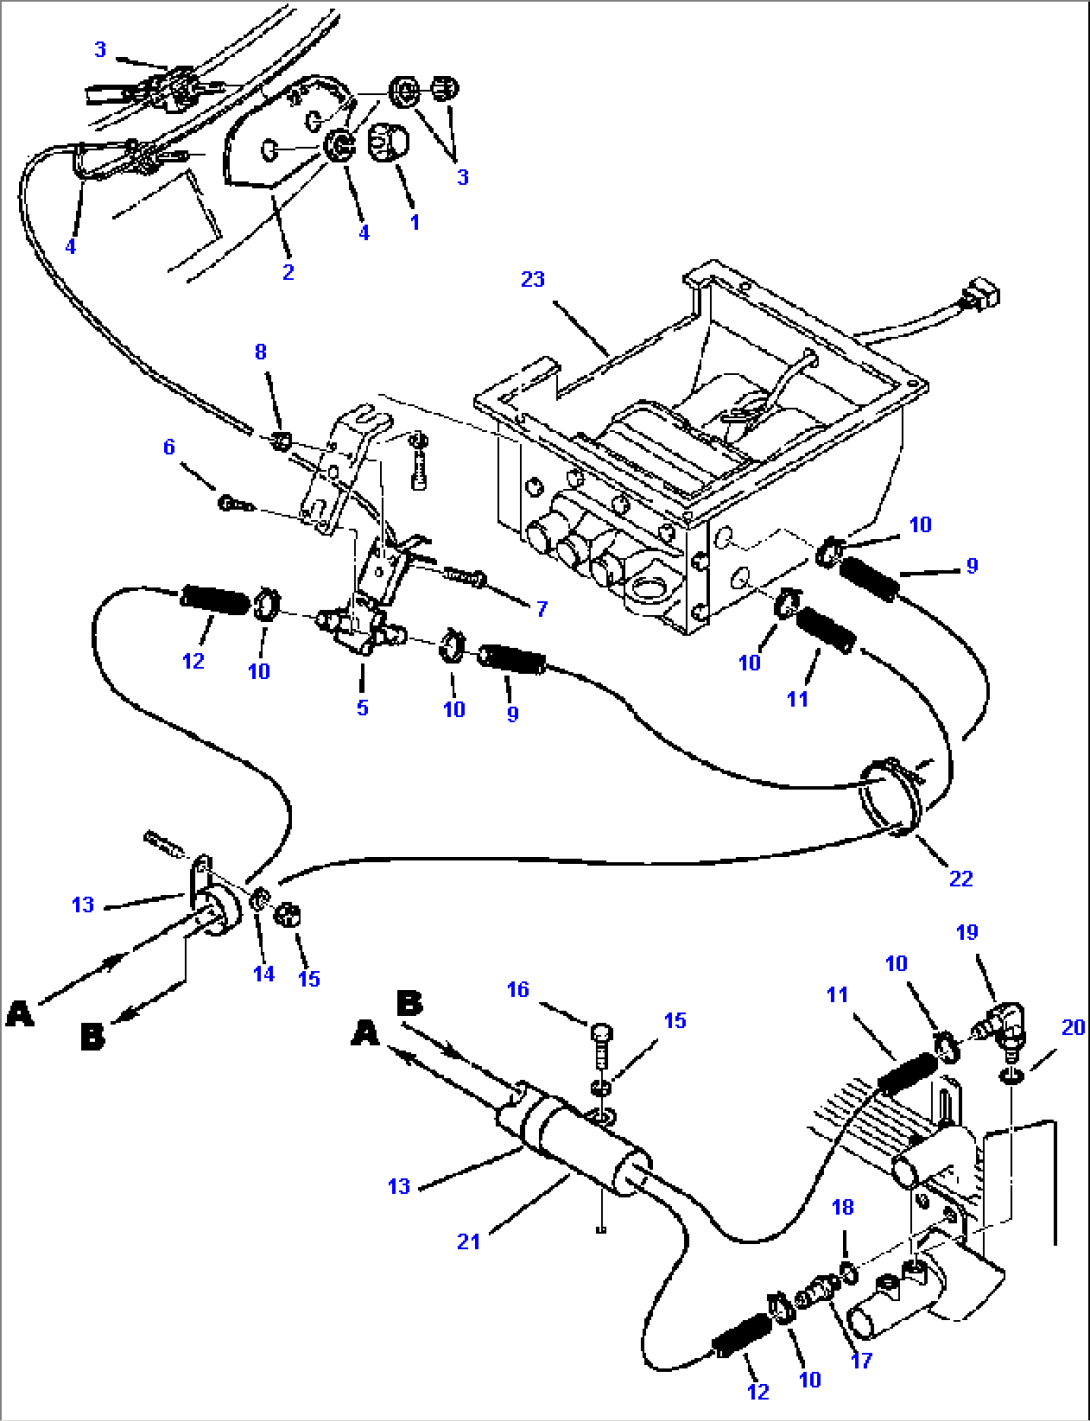 FIG. K5600-01A2 HEATER - CONTROLS AND PIPING